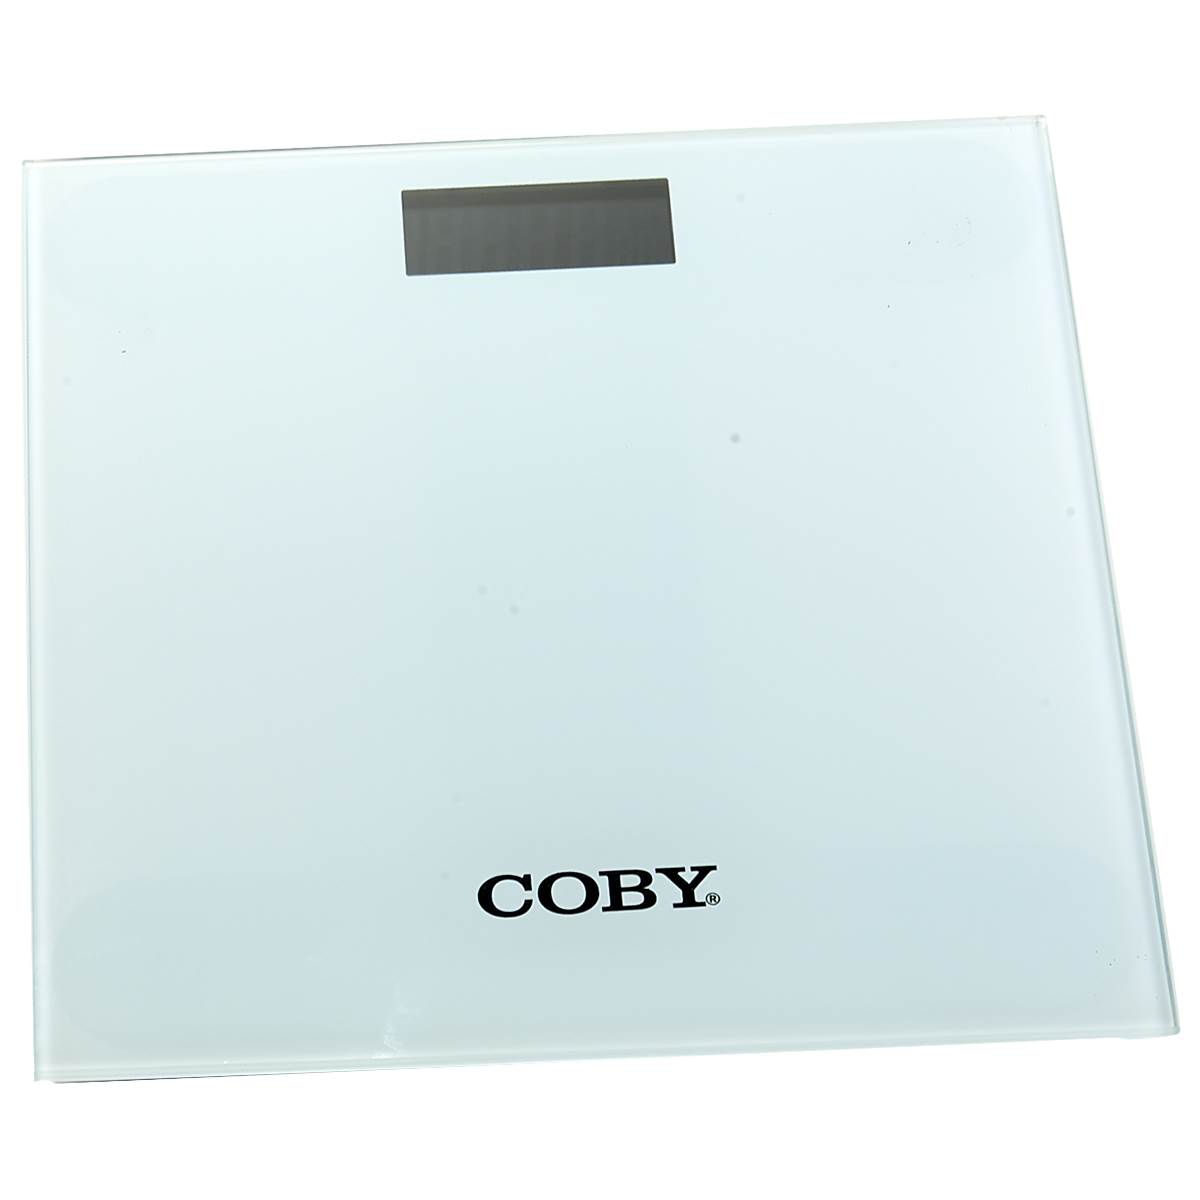 Coby Digital Glass Scale - White